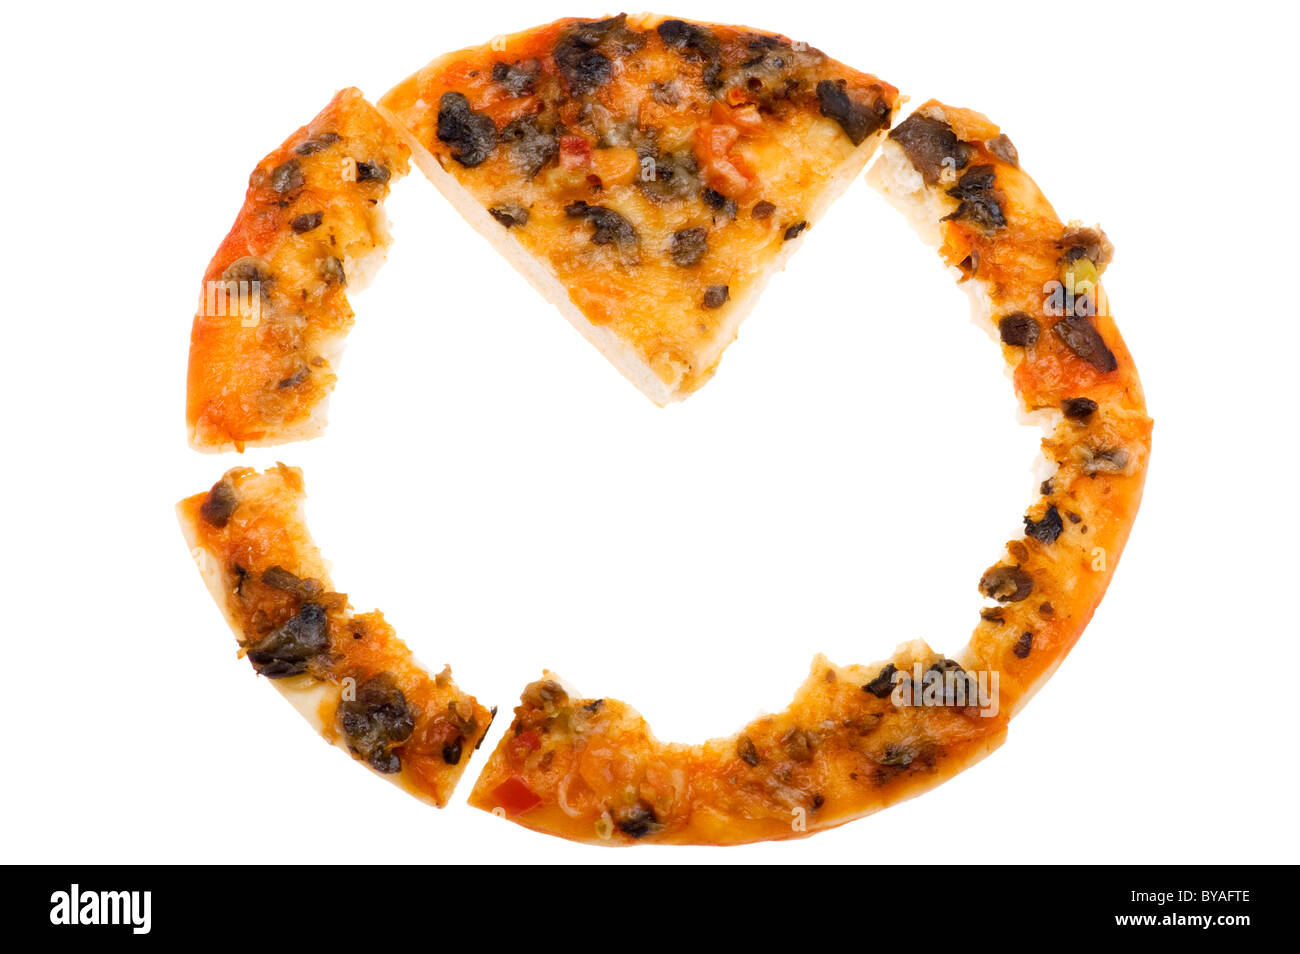 object on white - food sliced pizza Stock Photo